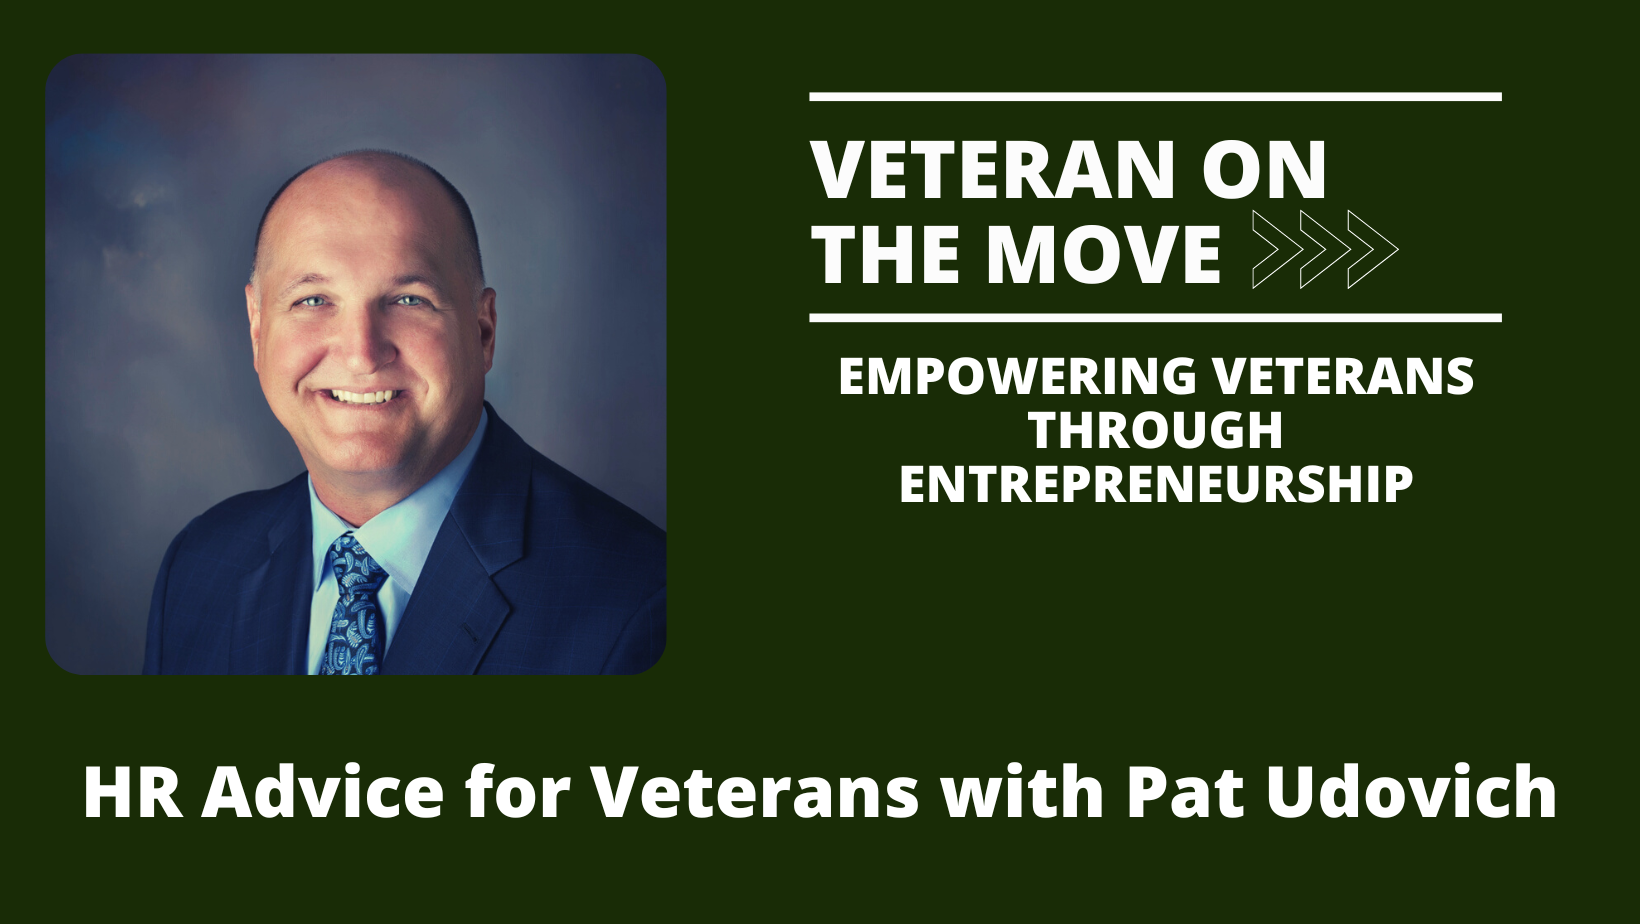 HR Advice for Veterans with Pat Udovich